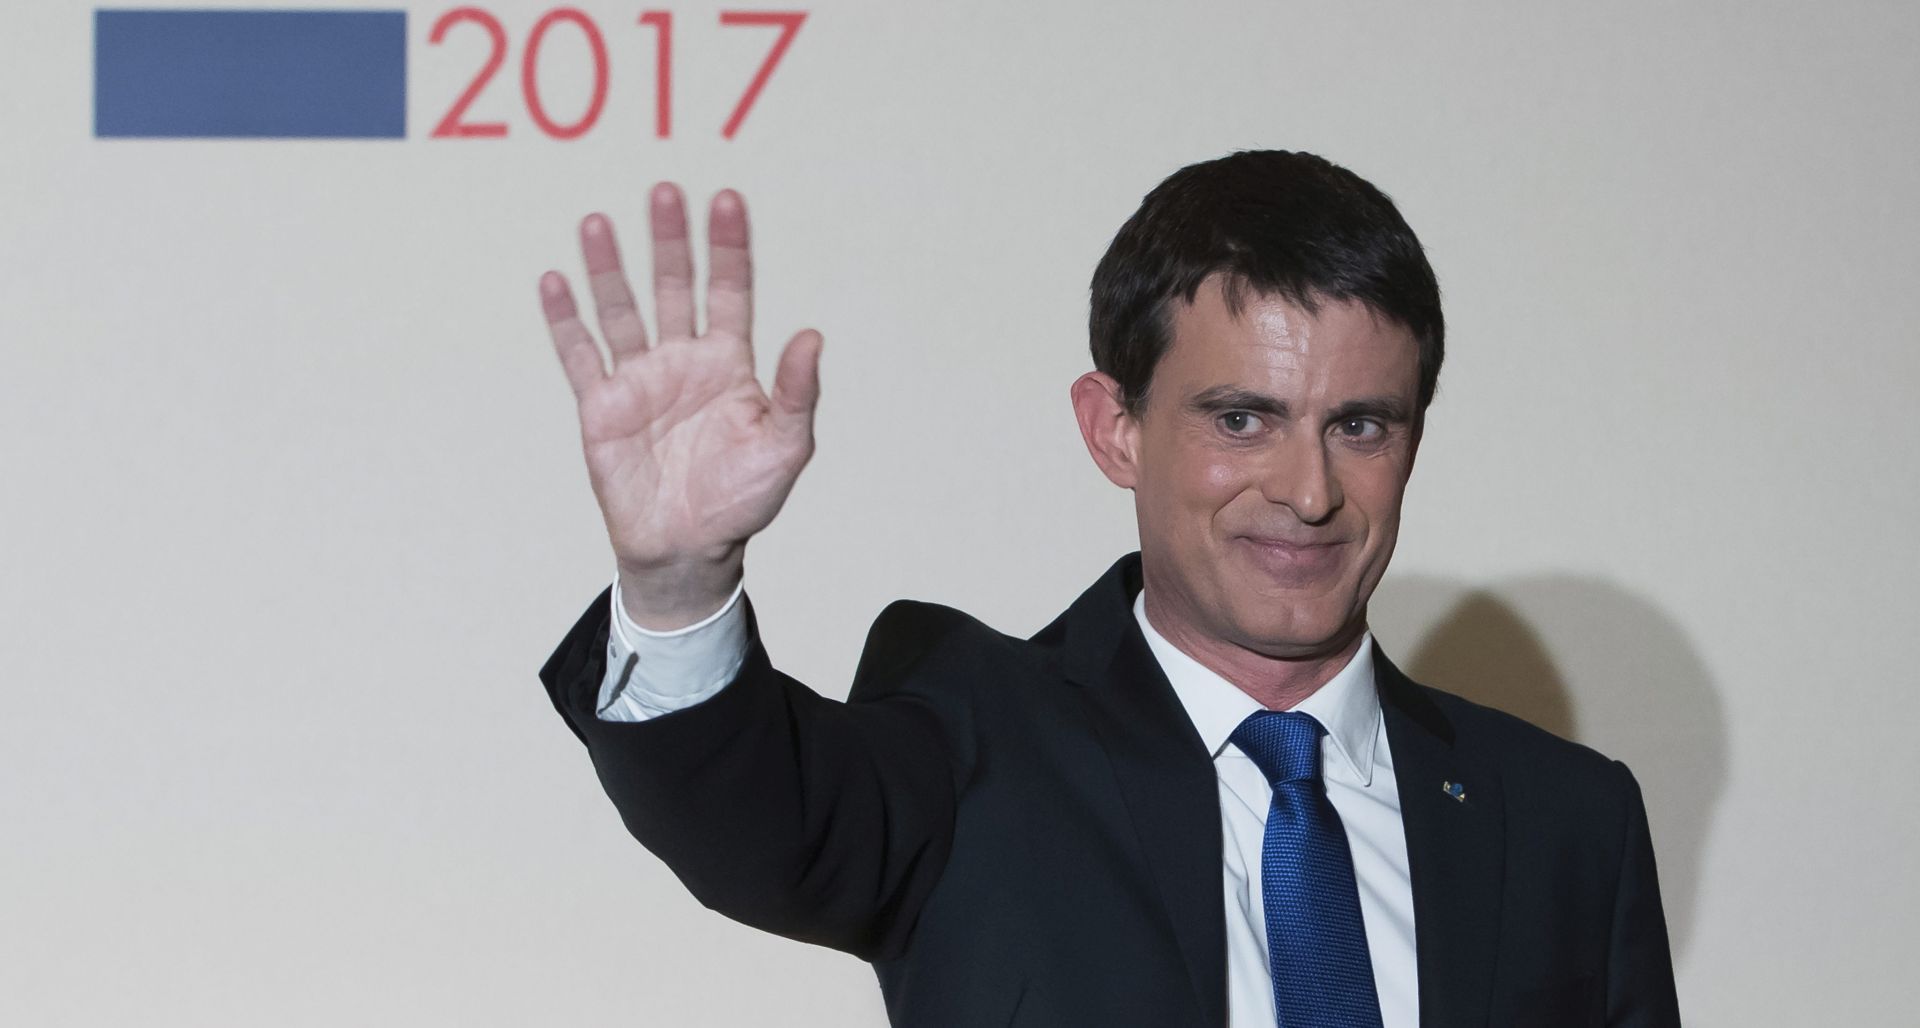 epa05760271 Former French Prime Minister and candidate for the left wing party Parti Socialiste (PS) party, Manuel Valls gestures after delivering his concession speech after losing the second round of the party primaries for the 2017 French Presidential Elections, in Paris, France, 29 January 2017. Poll estimates show Benoit Hamon winning the vote with 58.5 per cent of the vote against Valls' 41 per cent.  EPA/IAN LANGSDON